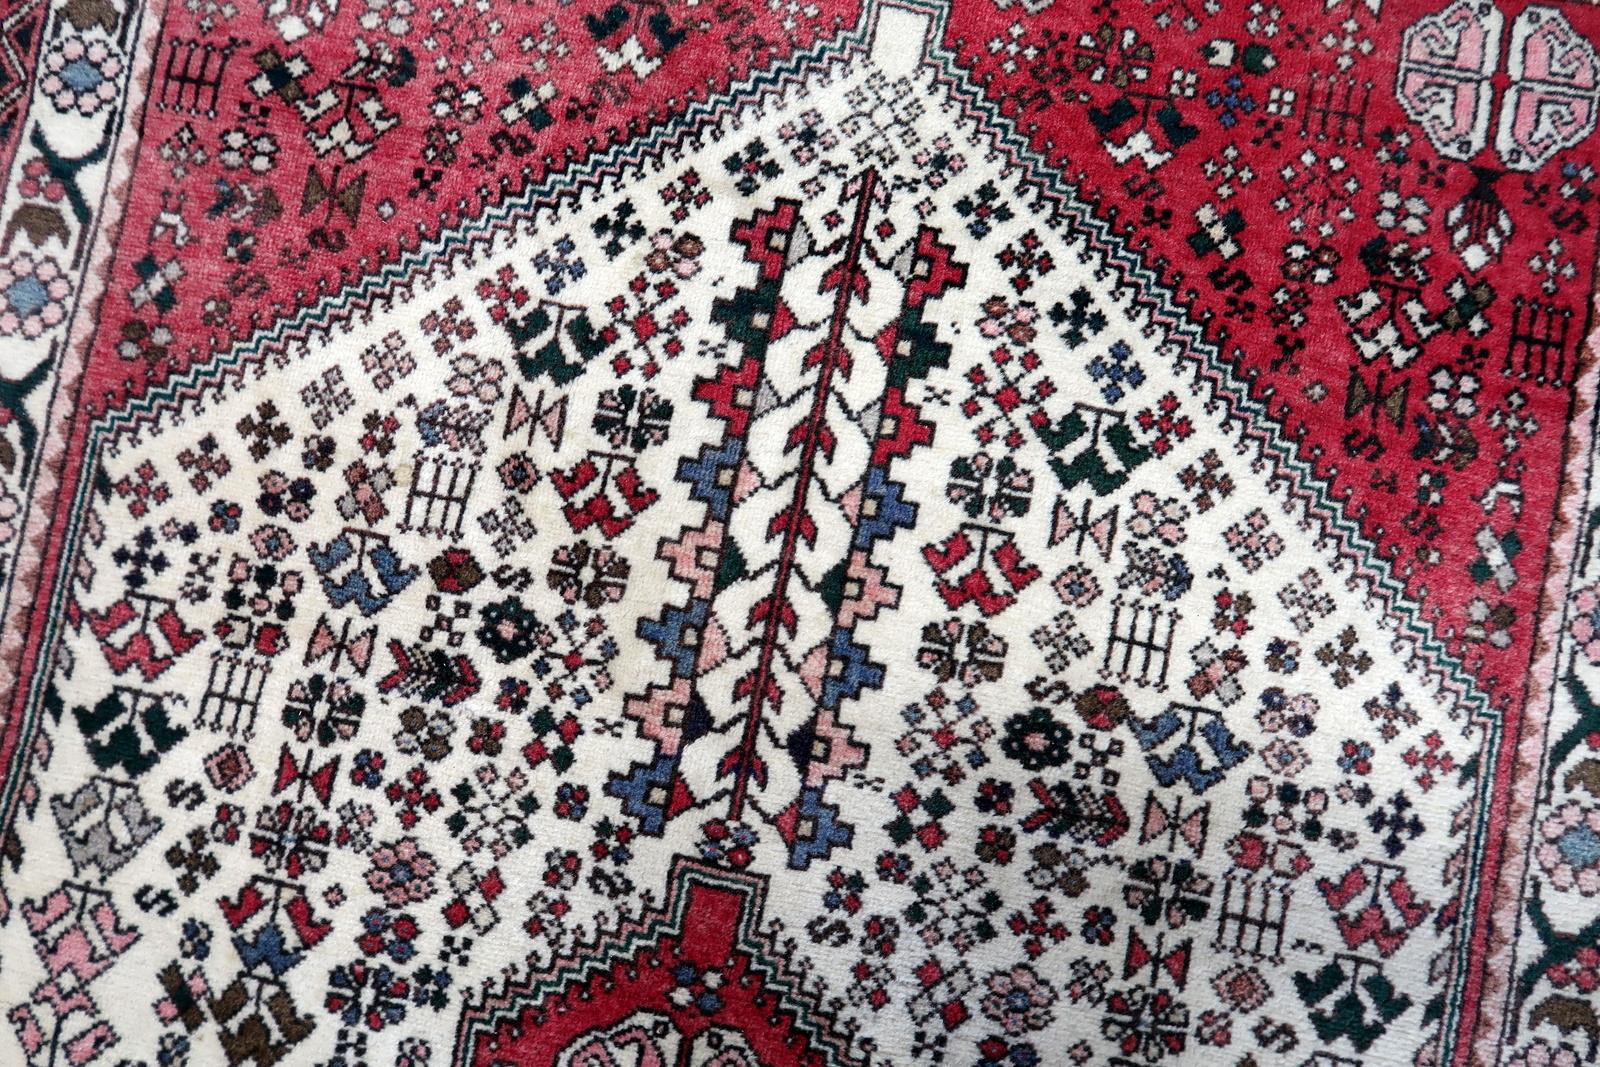 Late 20th Century Handmade Vintage Persian Style Malayer Rug 3.2' x 4.9', 1970s - 1C1120 For Sale